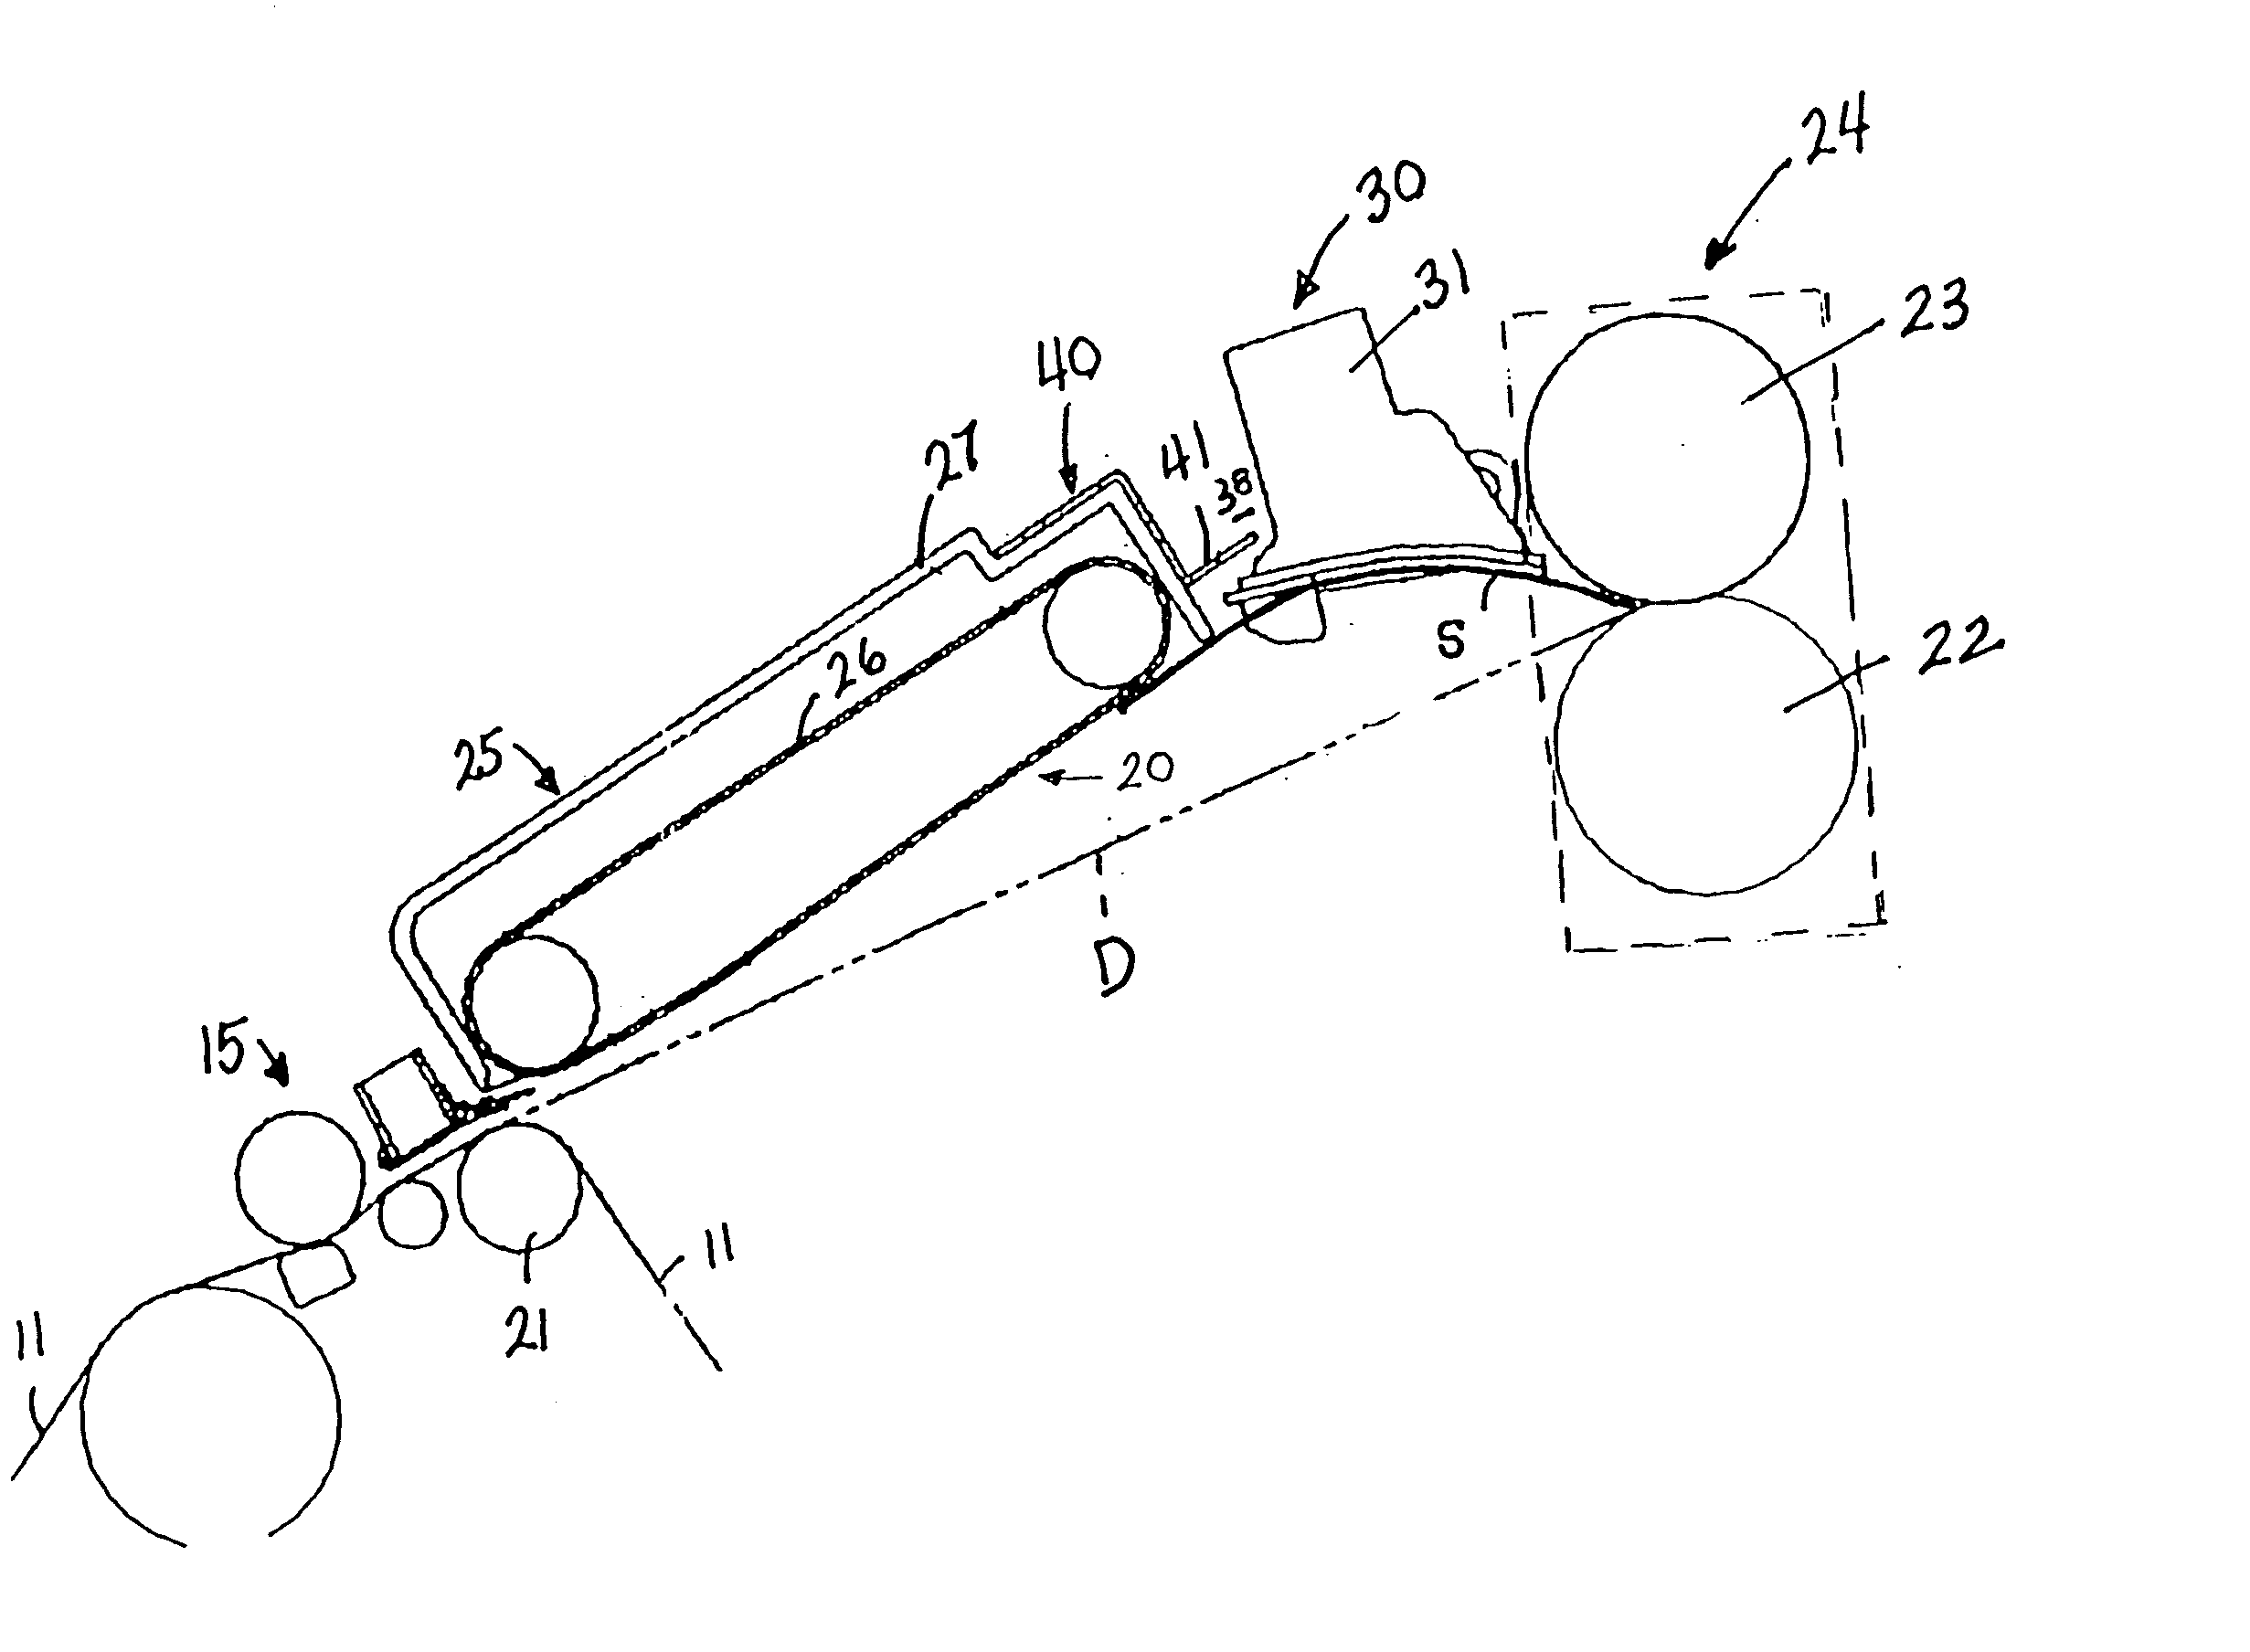 Air baffle for paper travel path within an electrophotographic machine